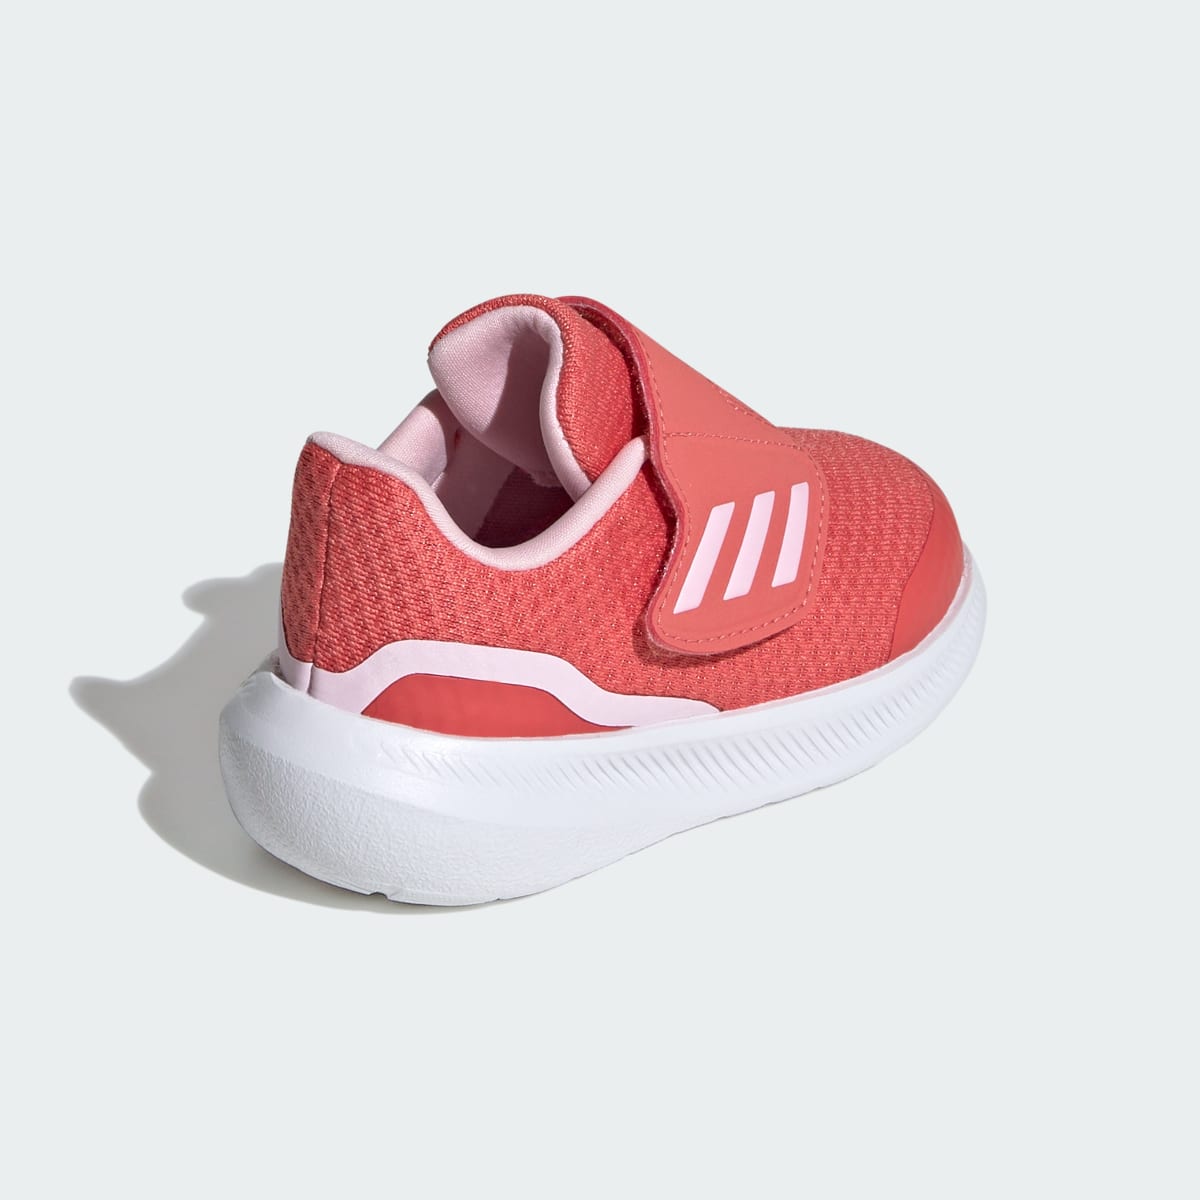 Adidas Runfalcon 3.0 Sport Running Hook-and-Loop Shoes. 6